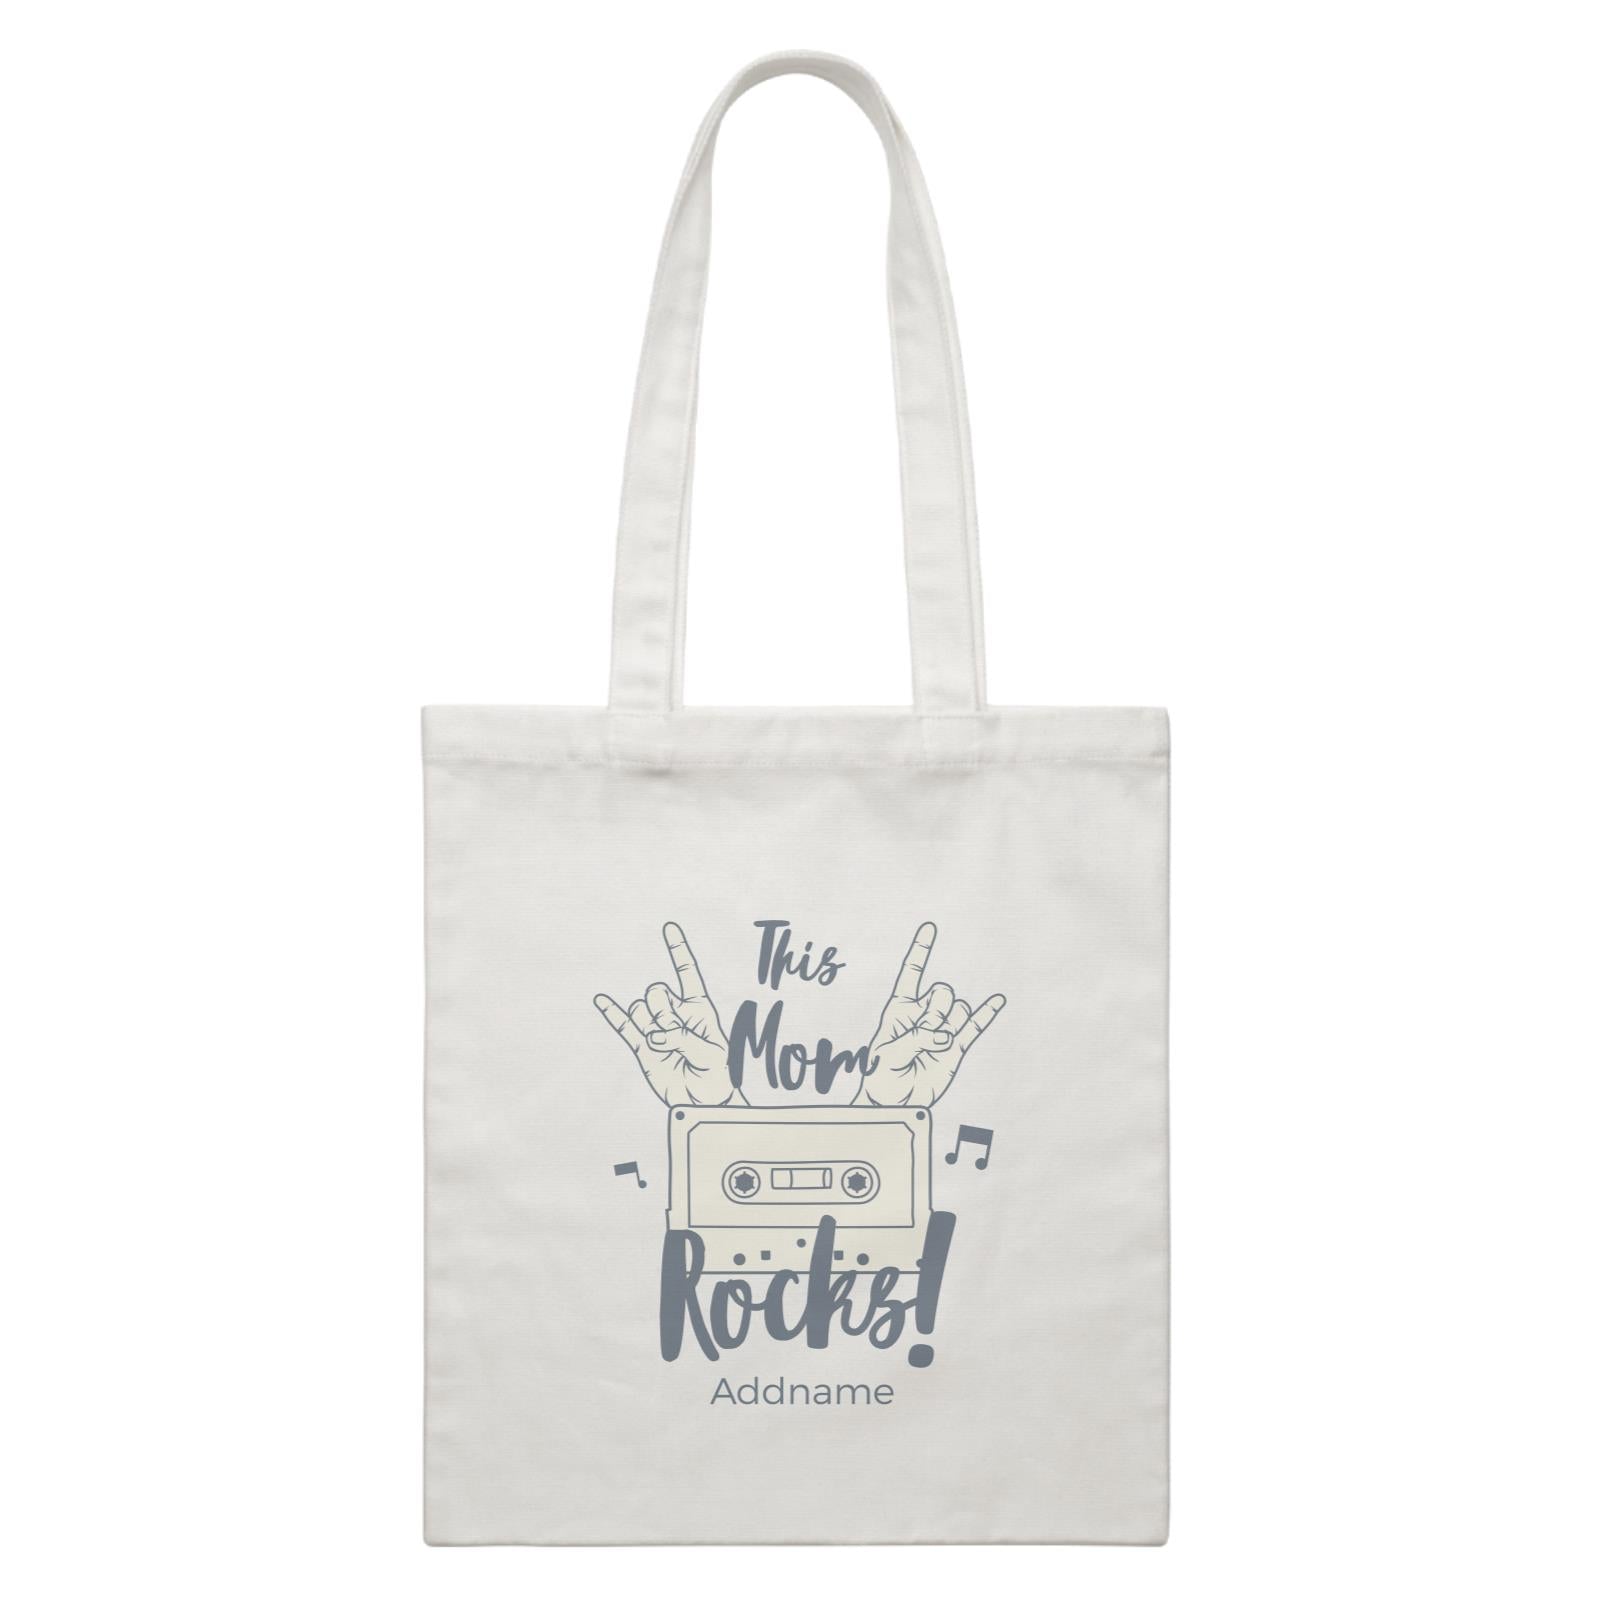 Awesome Mom 1 This Mom Rocks! Cassette Addname White Canvas Bag